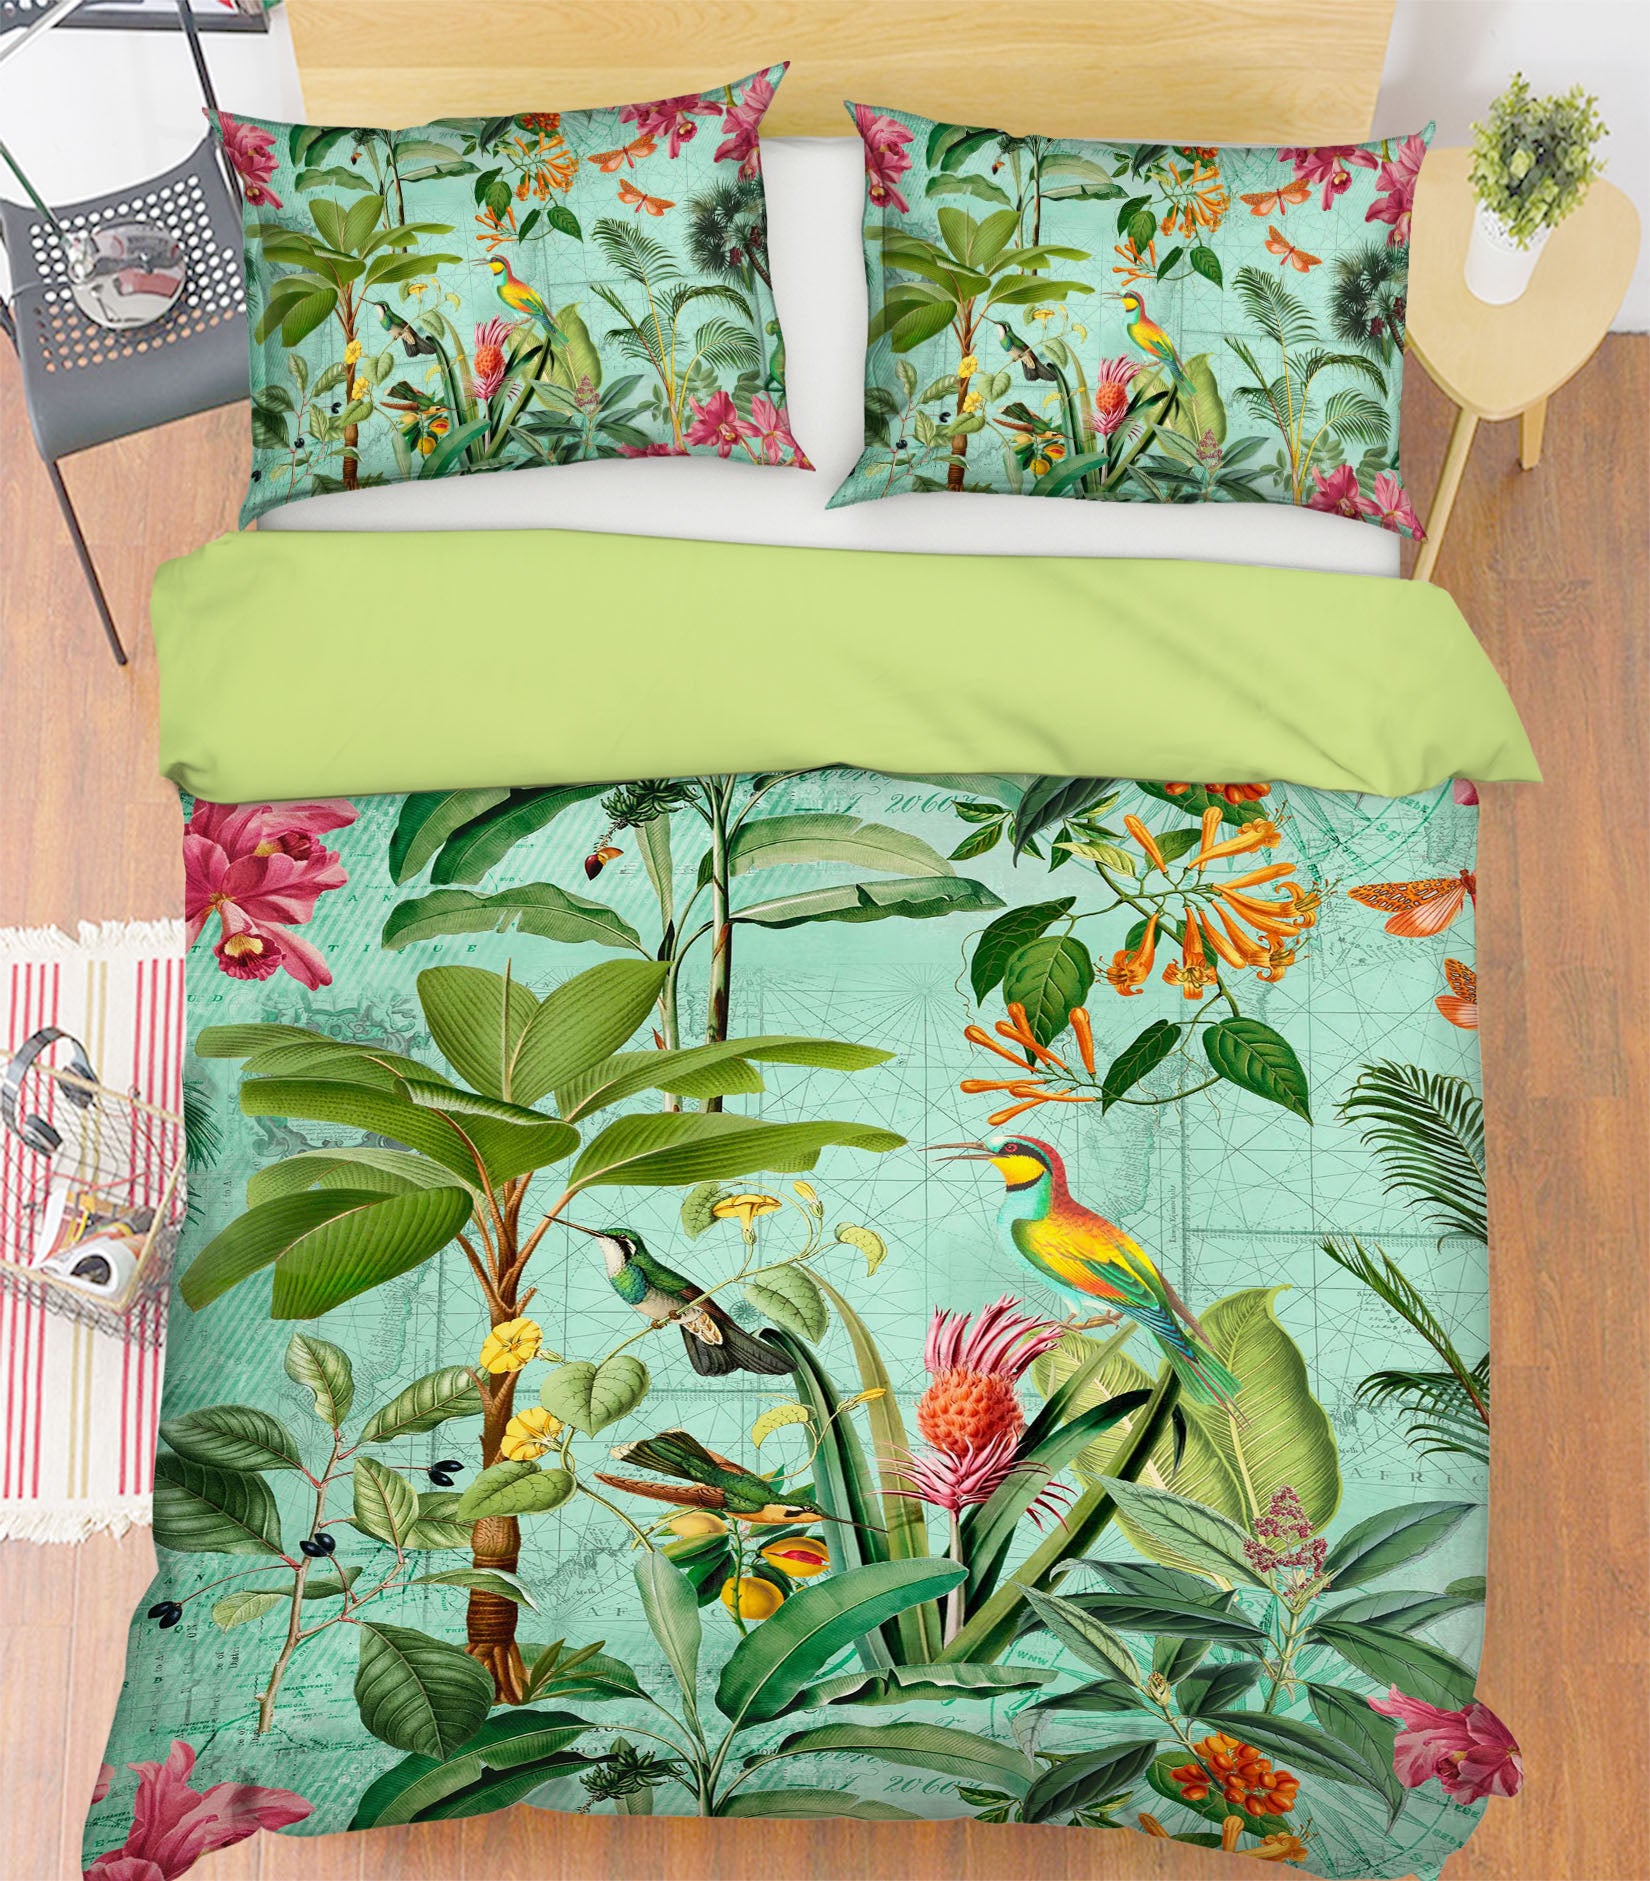 3D Happy Forest 126 Andrea haase Bedding Bed Pillowcases Quilt